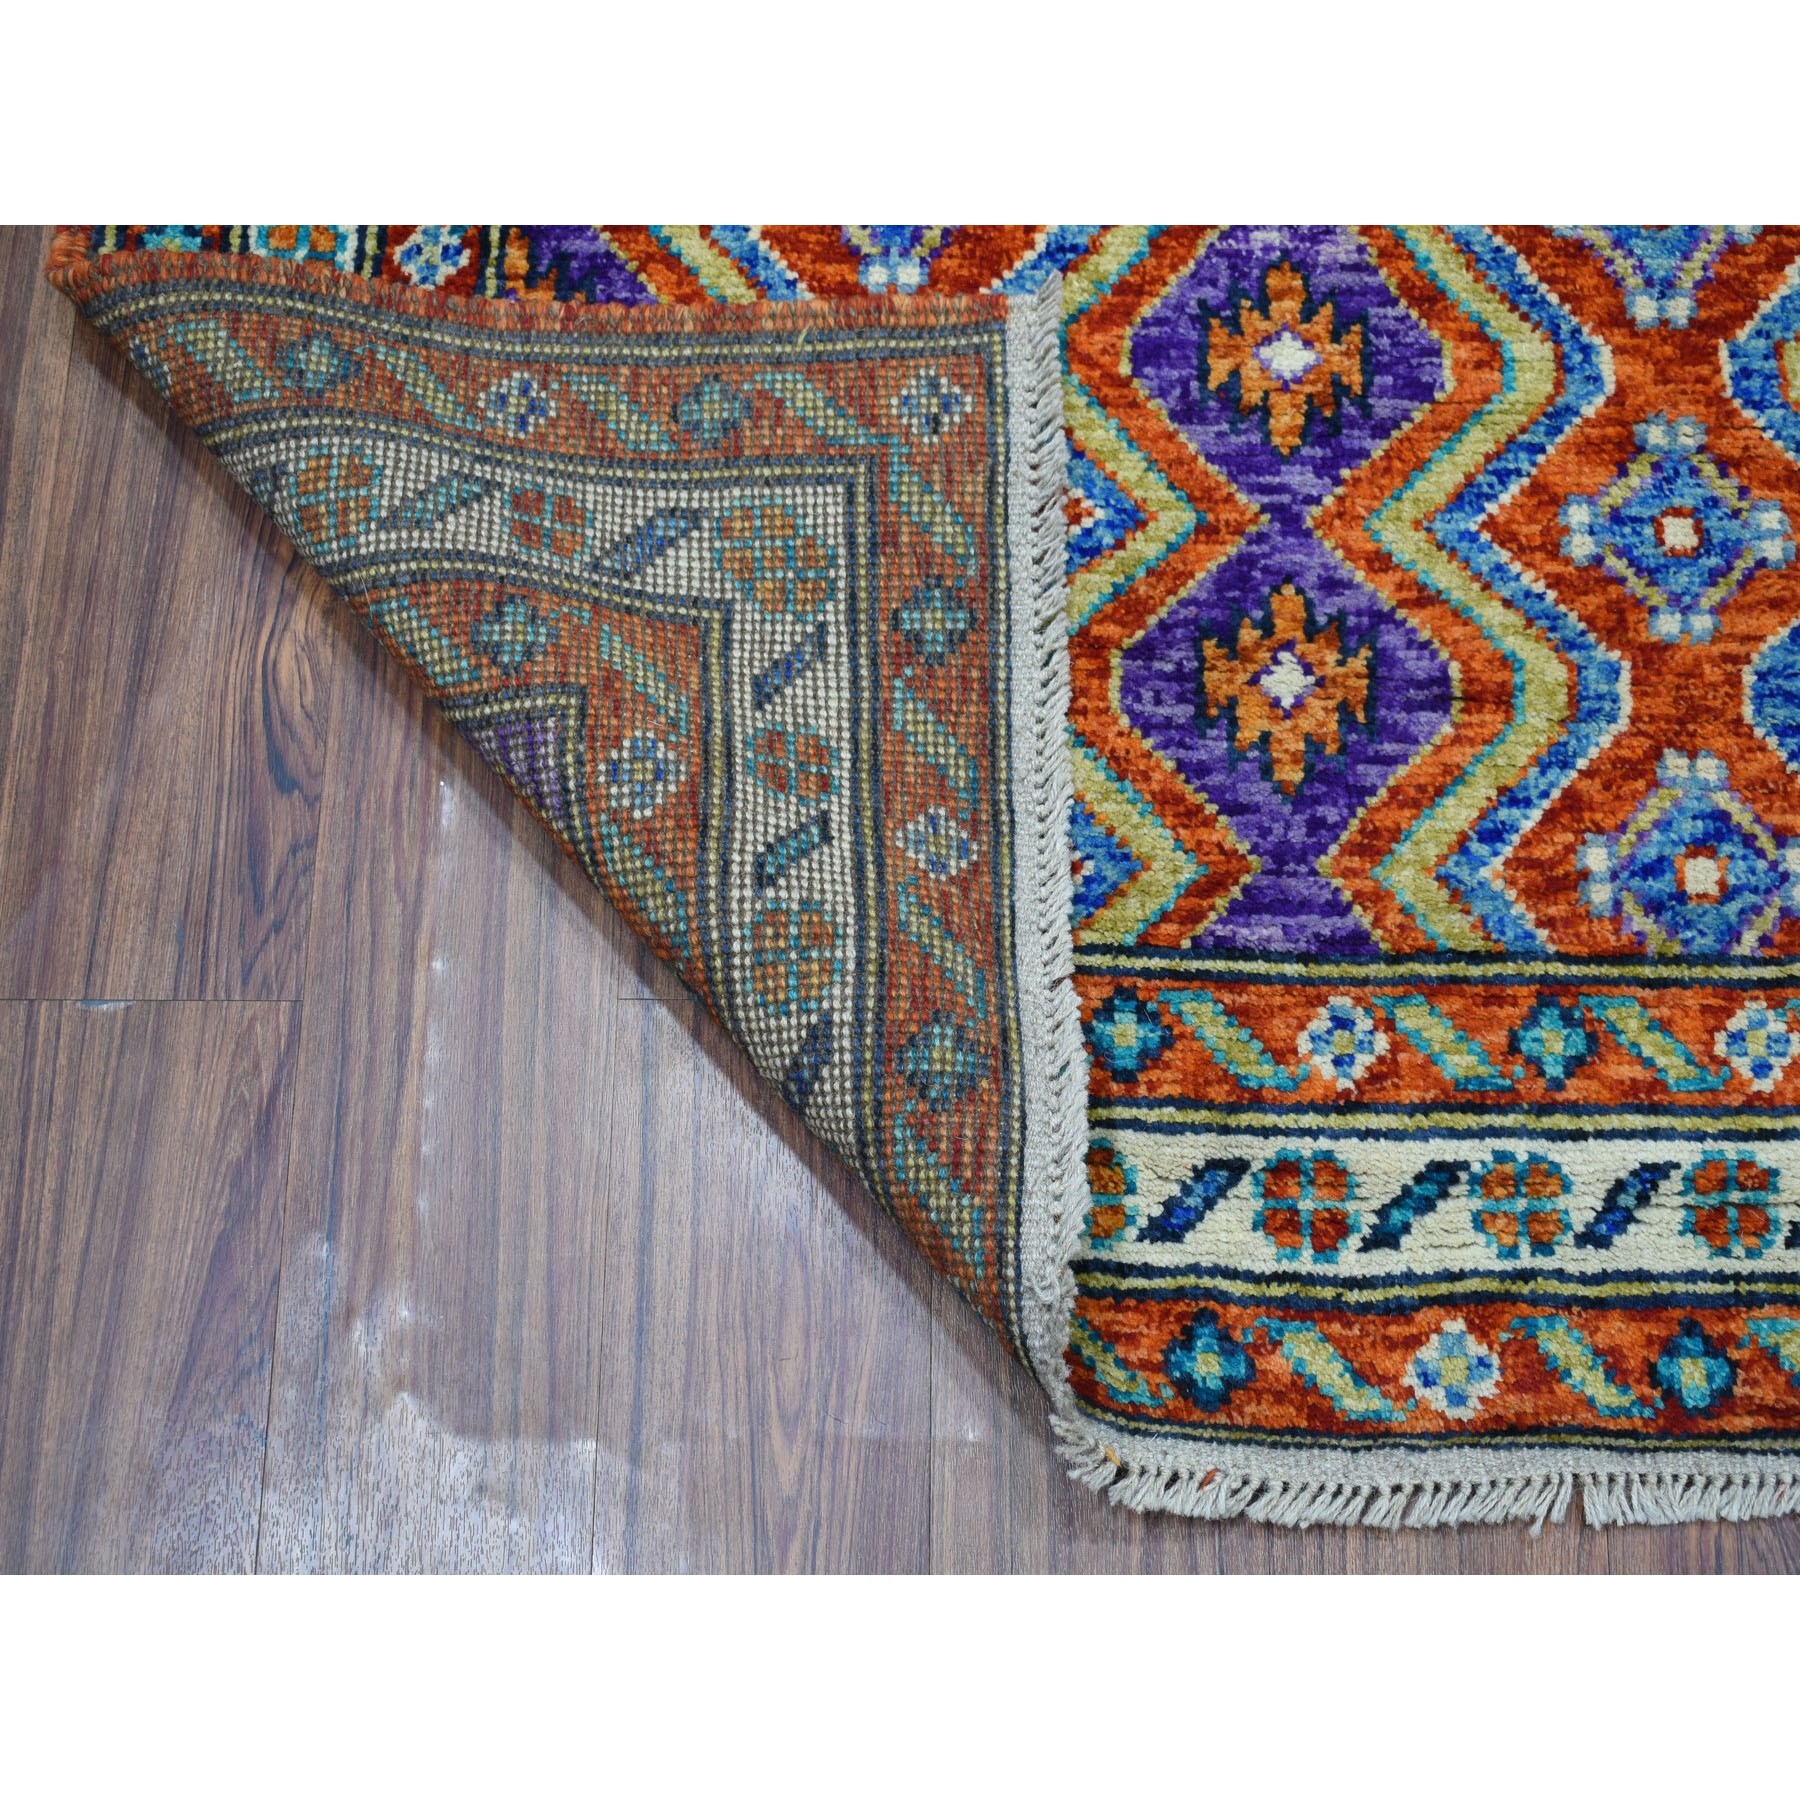 4-2 x5-10  Orange Colorful Afghan Baluch Tribal Design Pure Wool Hand Knotted Oriental Rug 